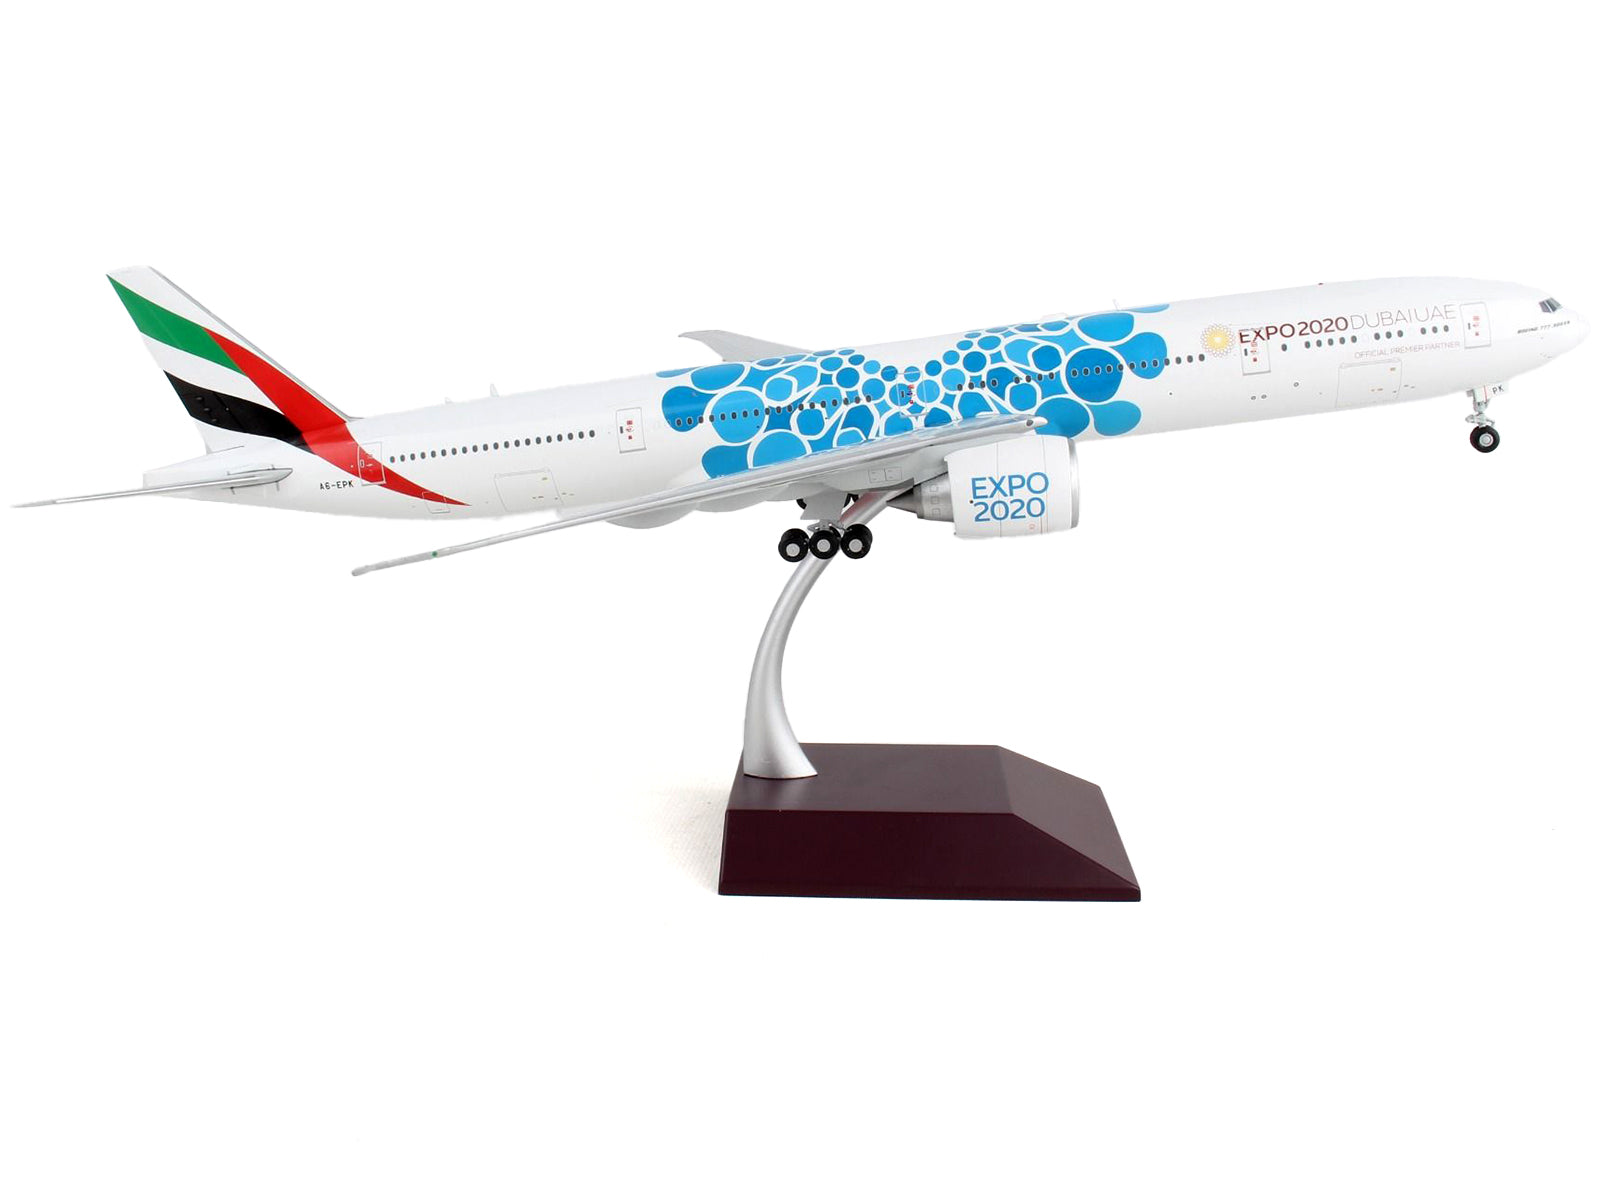 Boeing 777-300ER Commercial Aircraft "Emirates Airlines - Dubai Expo 2020" White with Blue Graphics "Gemini 200" Series 1/200 Diecast Model Airplane by GeminiJets